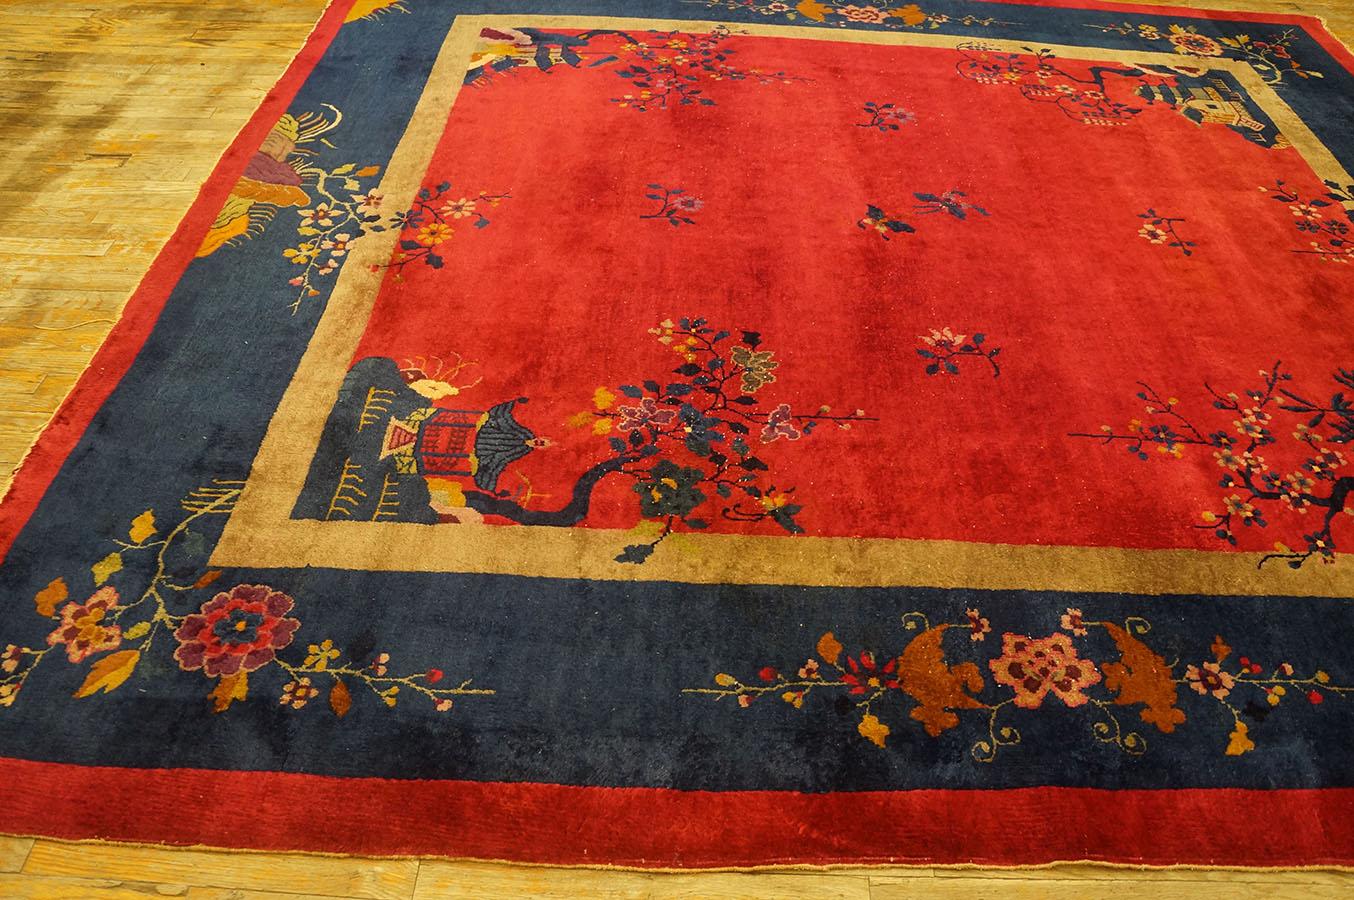 Early 20th Century 1920s Chinese Art Deco Carpet ( 9' x 9' 9'' - 275 x 297 cm ) For Sale